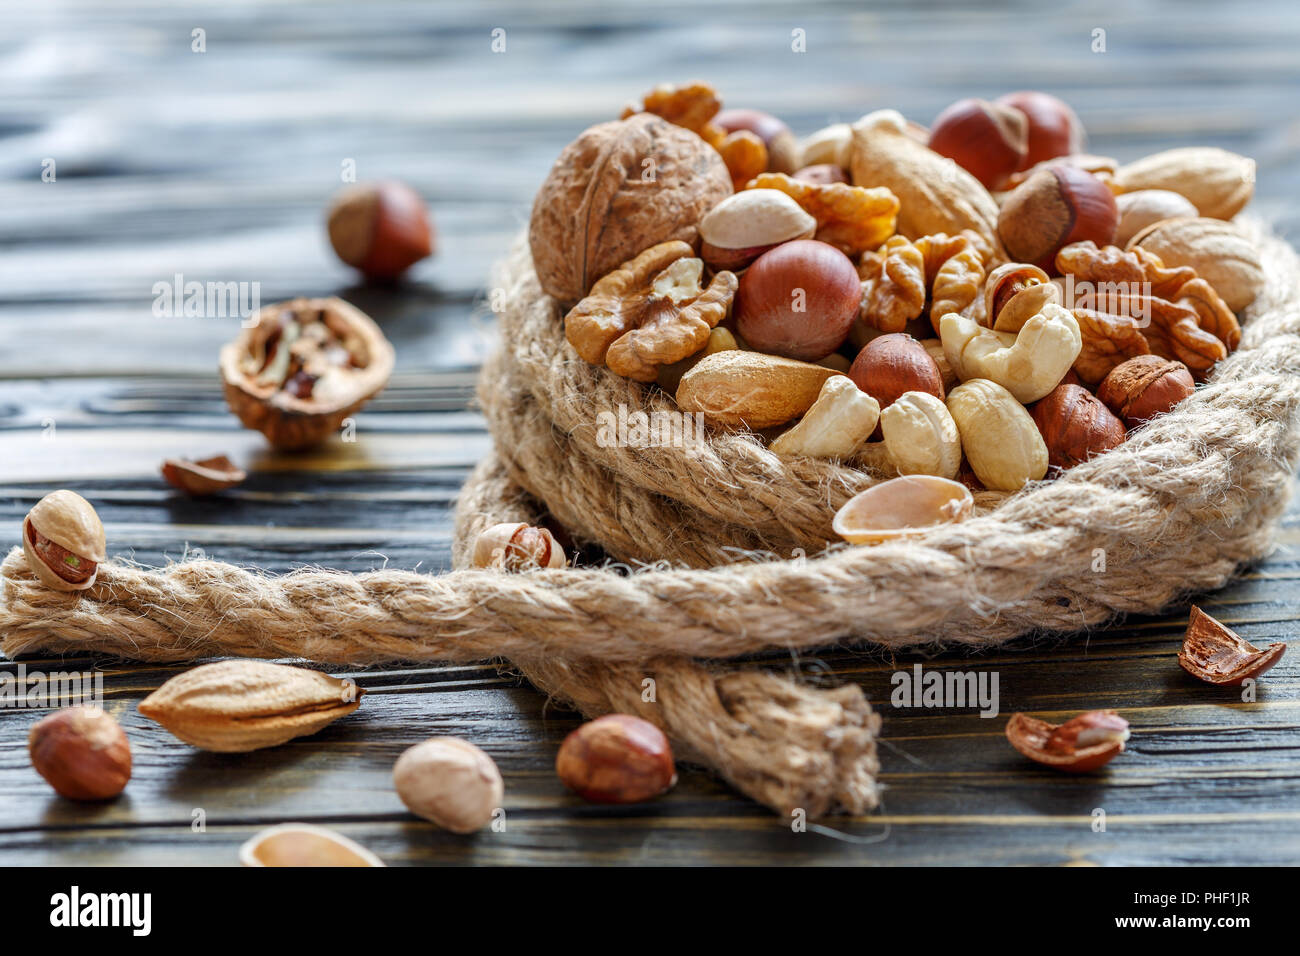 Hemp rope and a mixture of nuts. Stock Photo